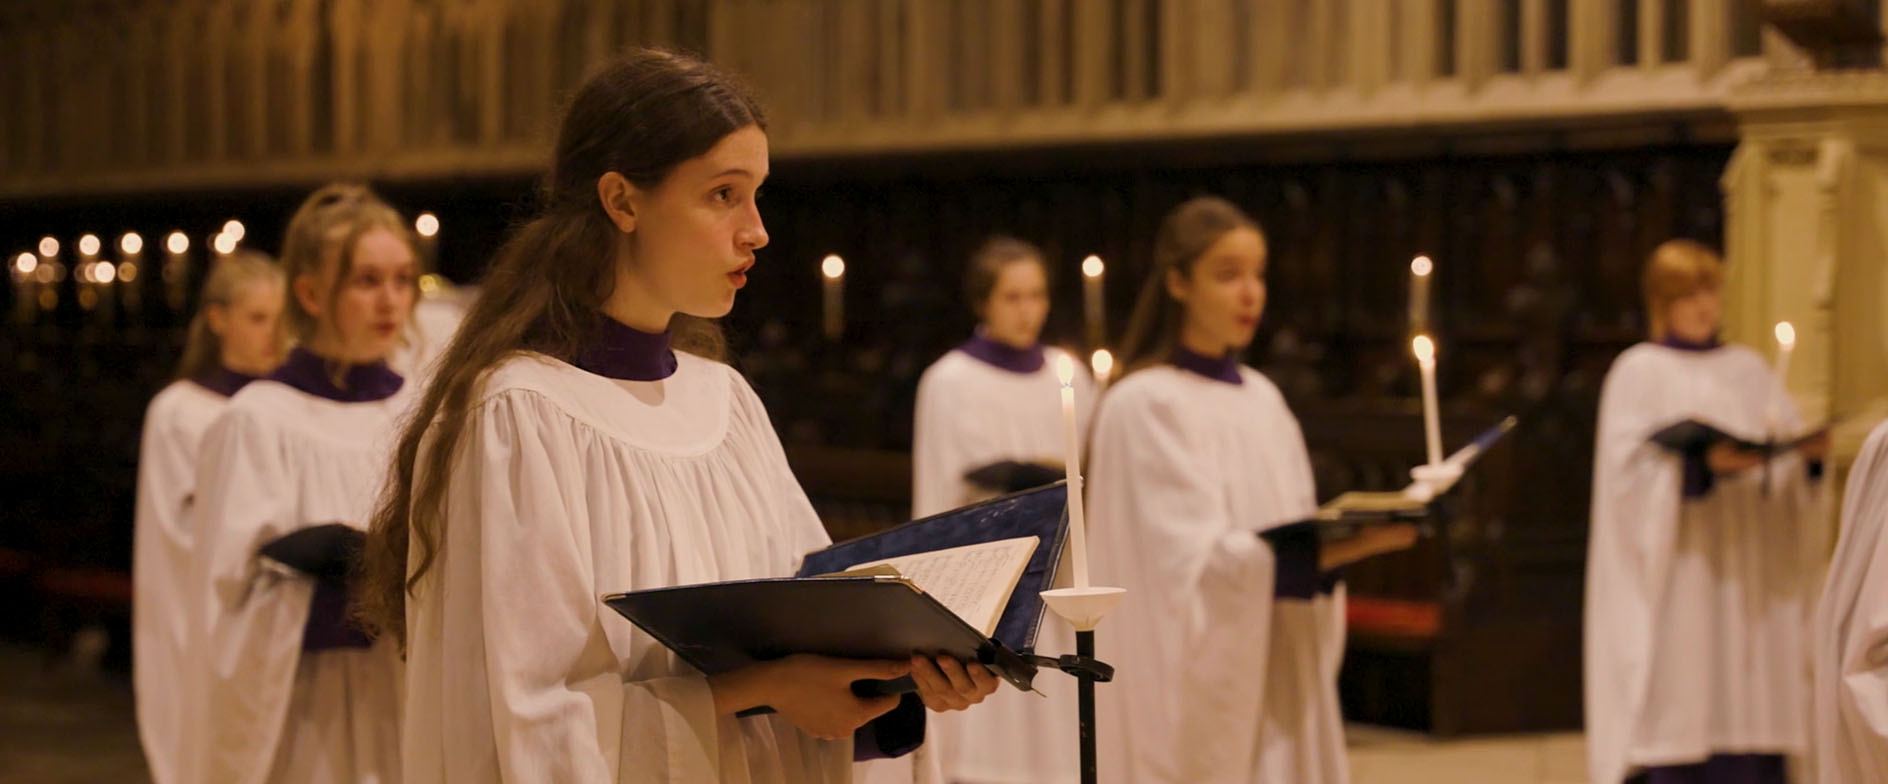 Girls singing in a cathedral choir